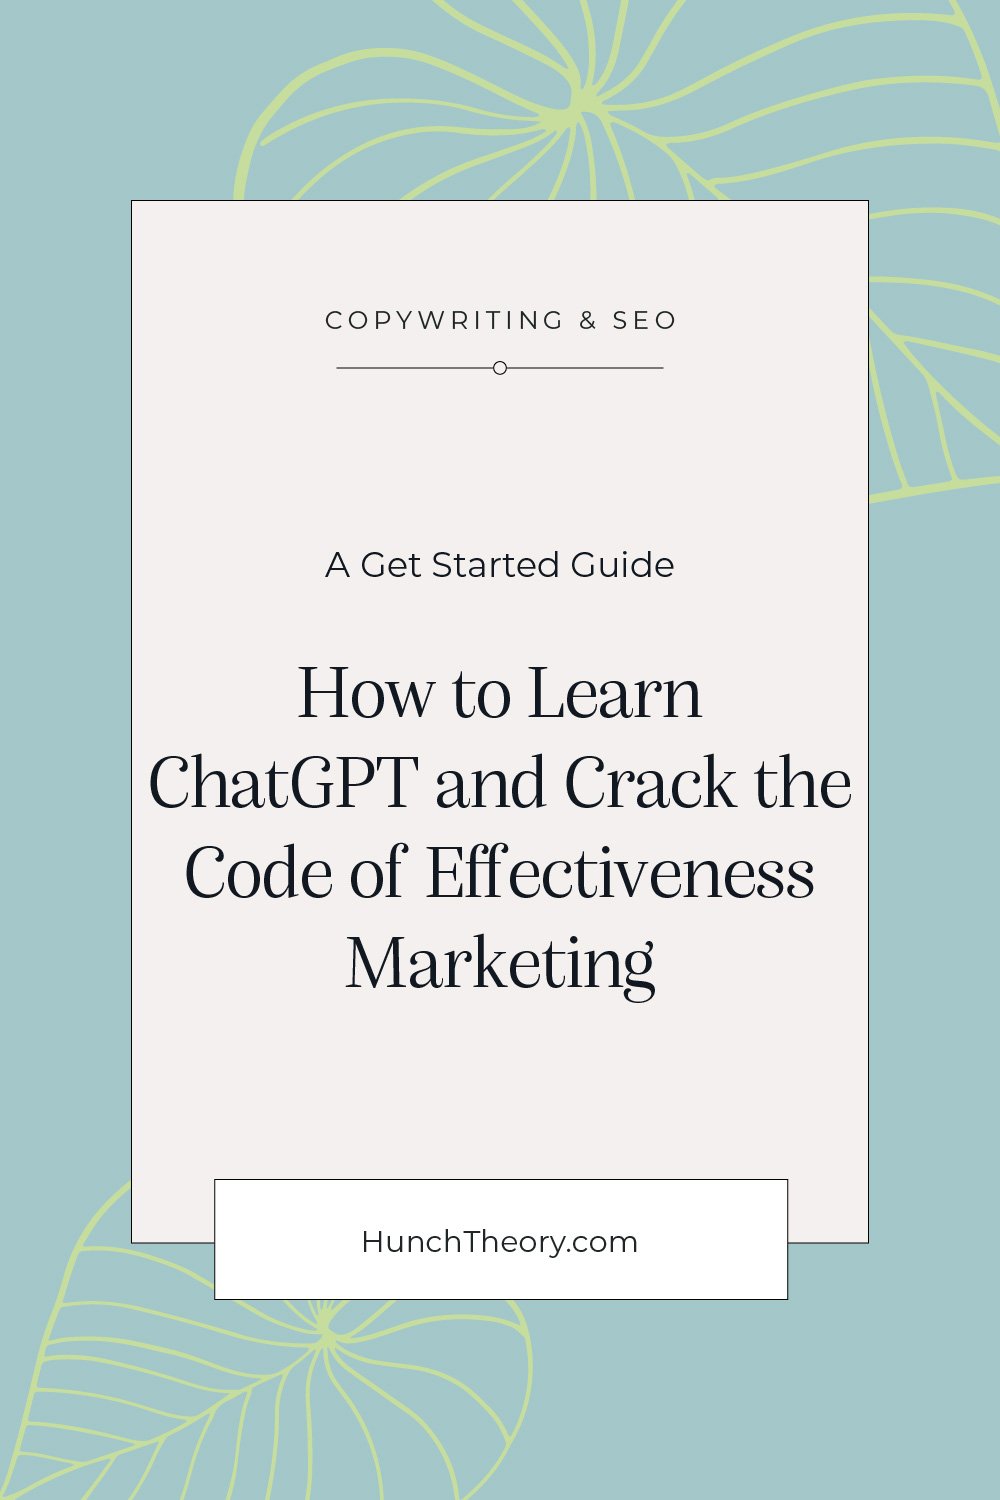 How to Learn ChatGPT and Crack the Code of Effectiveness Marketing